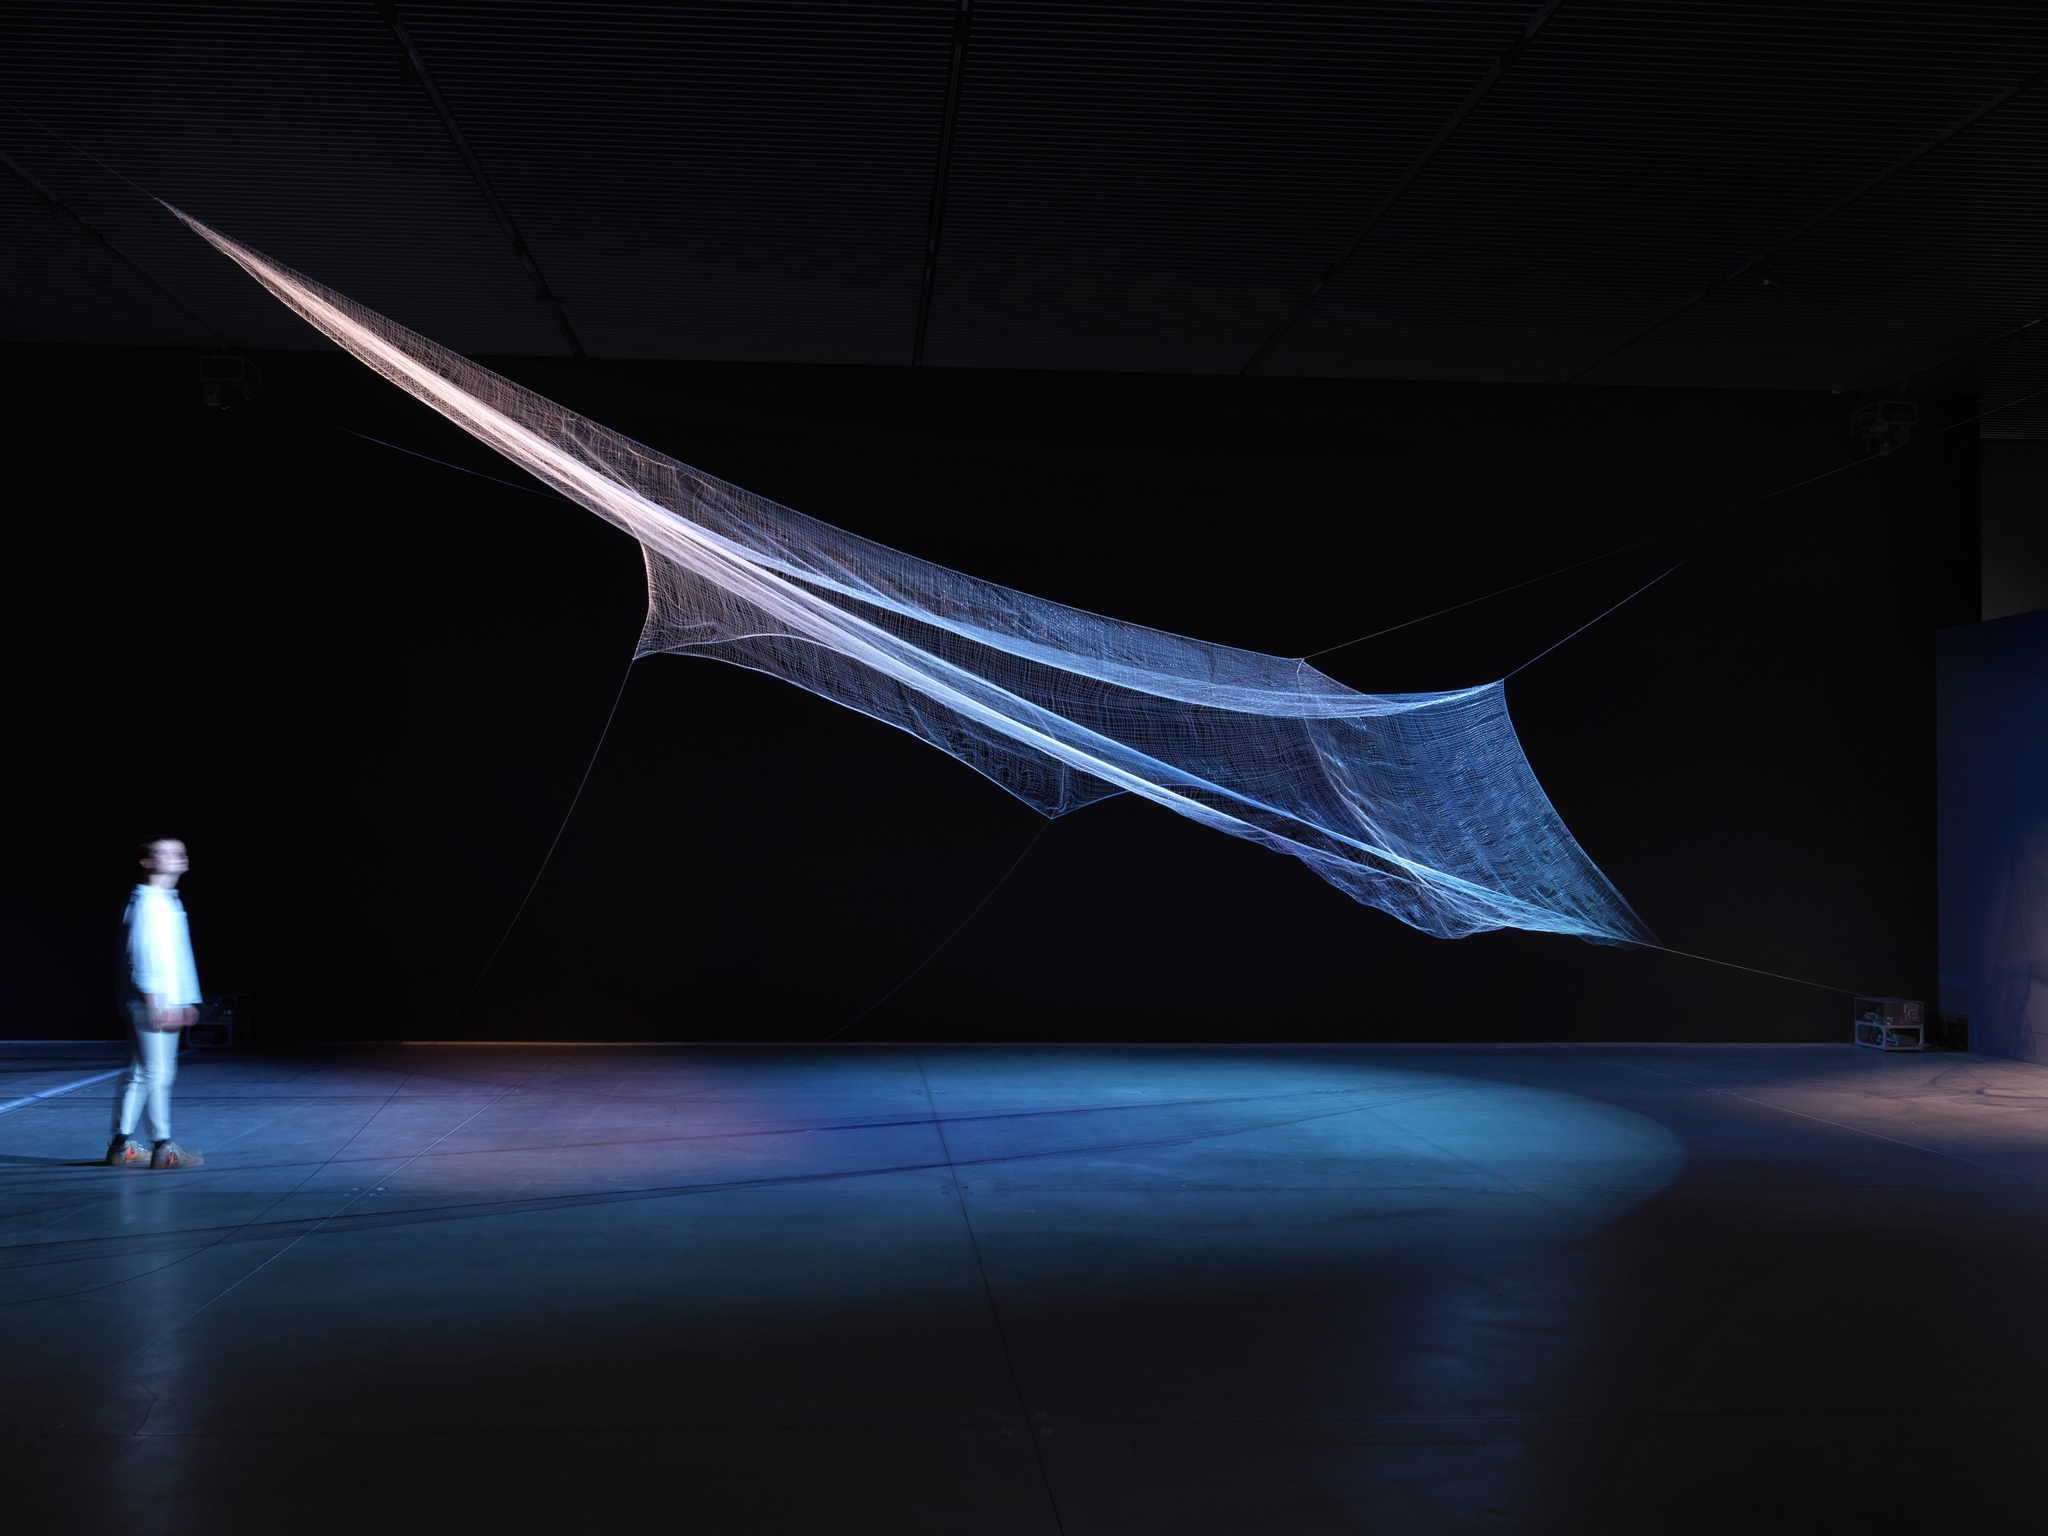 A fabric sculpture stretched elegantly in an upward slope toward a solitary viewer in a darkened gallery. The sculpture is lit in a soft blue and purple light.